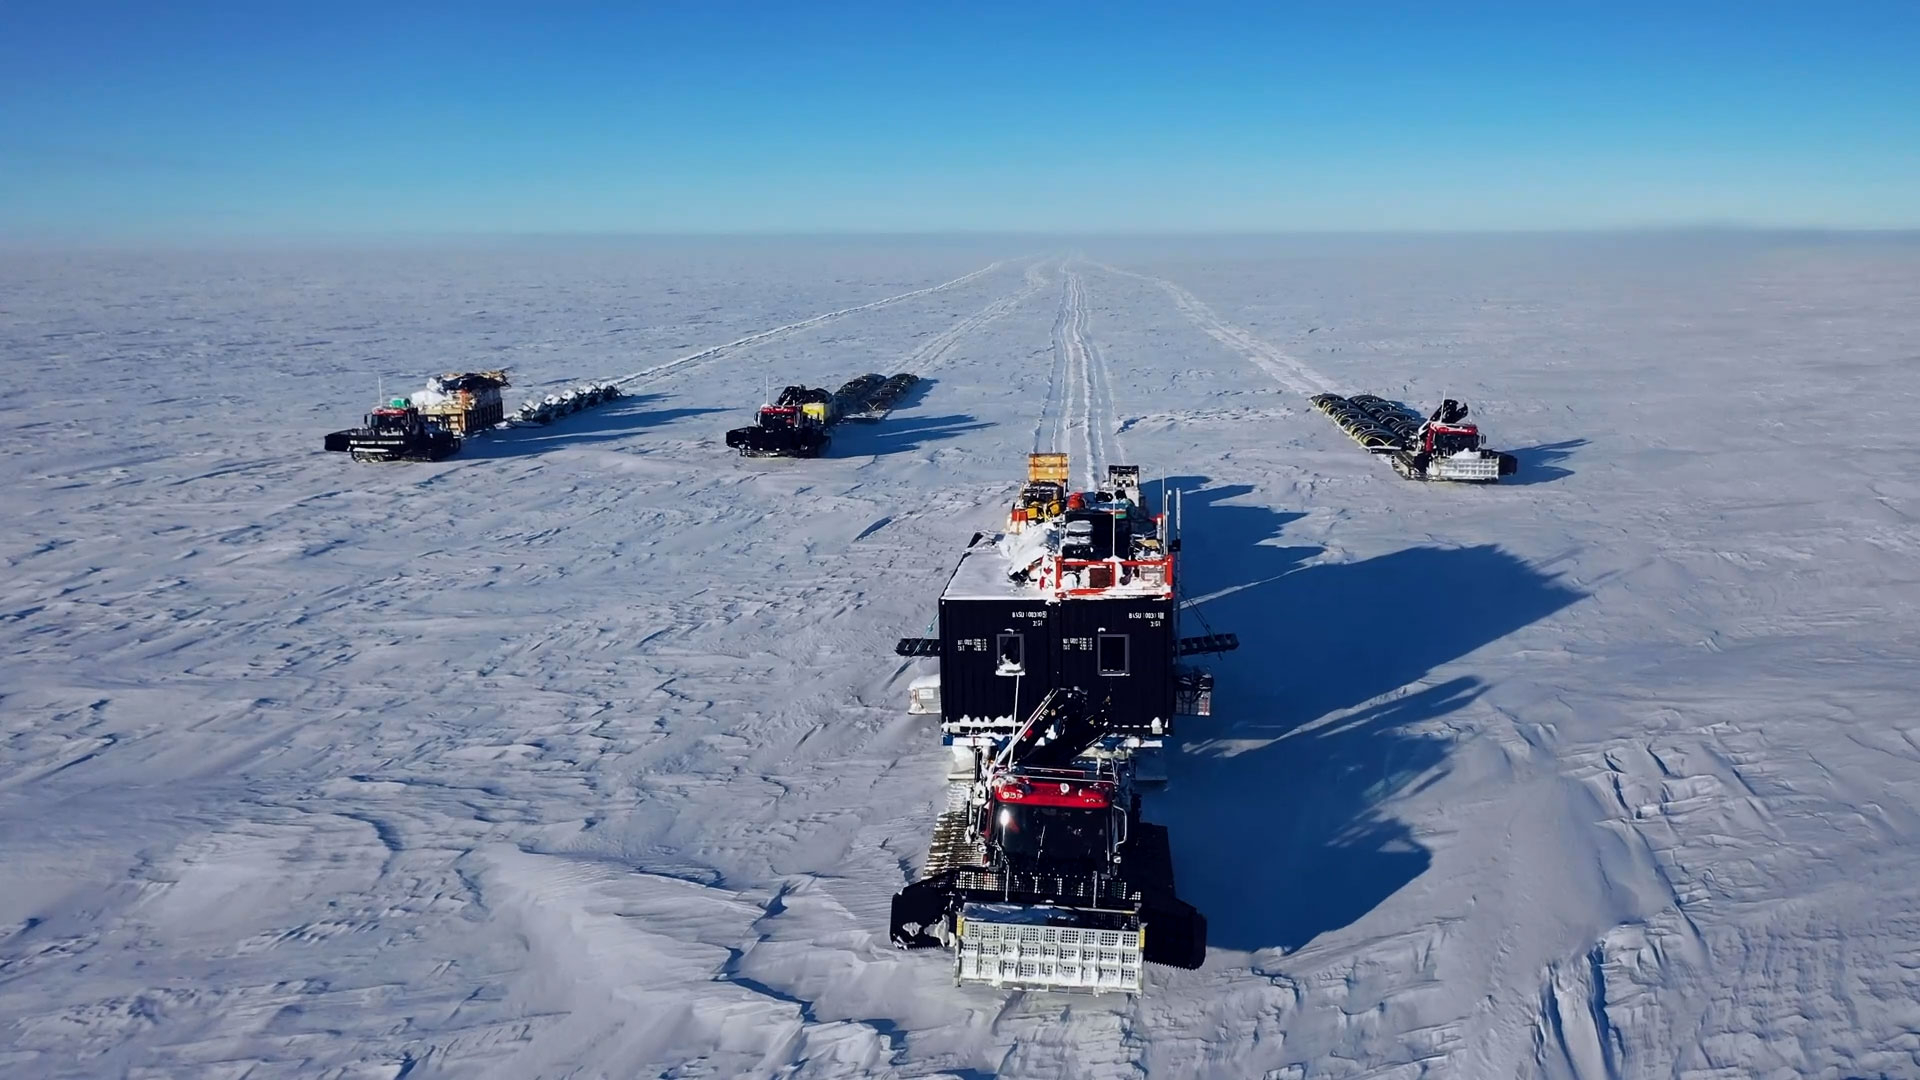 Deep Field traverse team of four Pistenbully tractors. Each tows Lehman Sledge units containing living quarters, equipment, supplies and fuel required for the weeks or months they will be traveling.